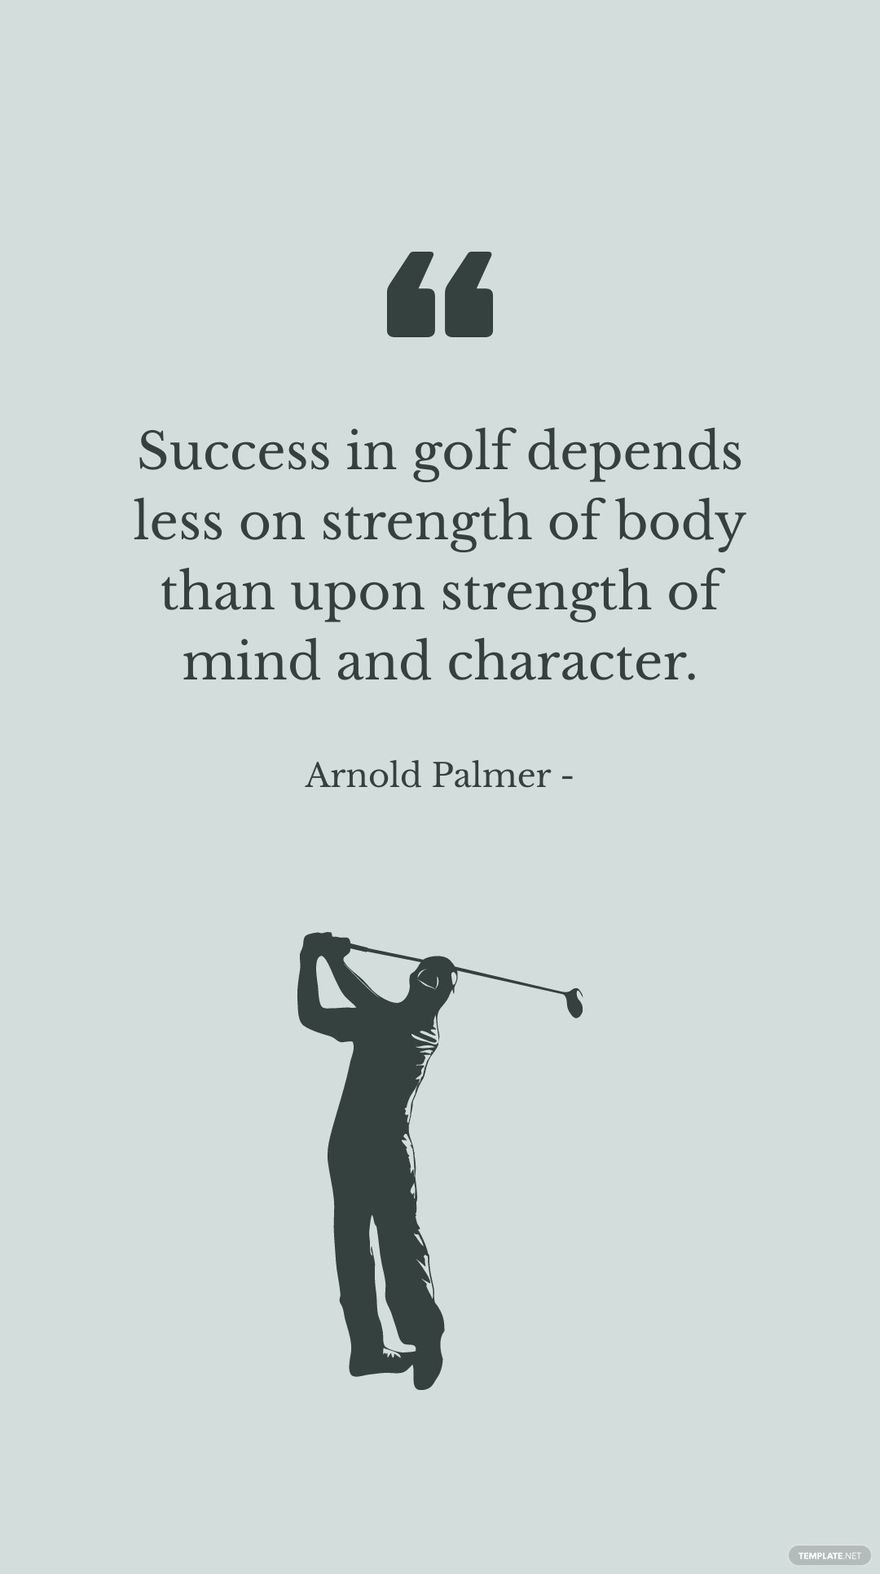 Arnold Palmer - Success in golf depends less on strength of body than upon strength of mind and character.